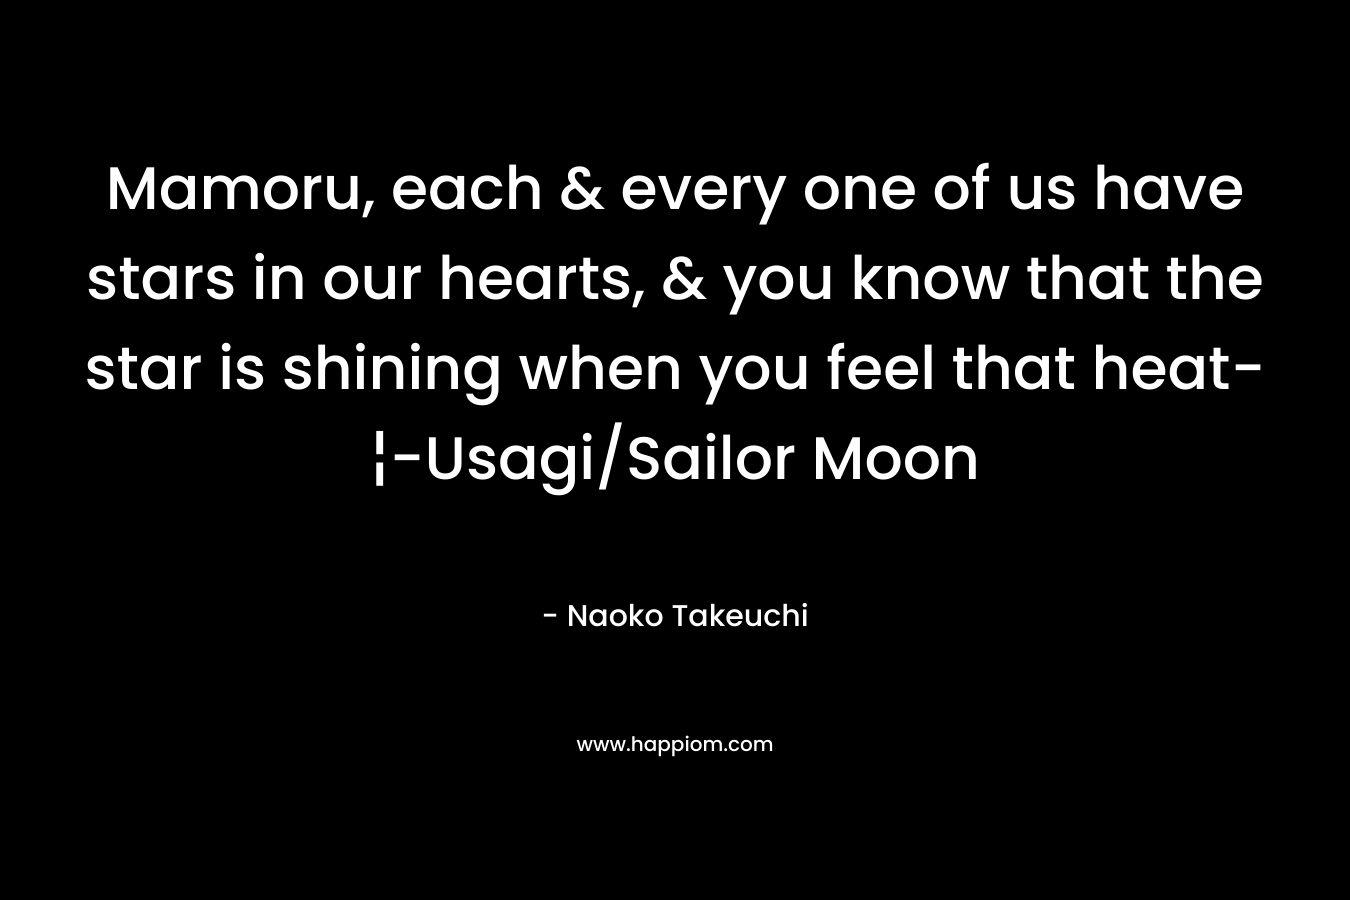 Mamoru, each & every one of us have stars in our hearts, & you know that the star is shining when you feel that heat-¦-Usagi/Sailor Moon – Naoko Takeuchi